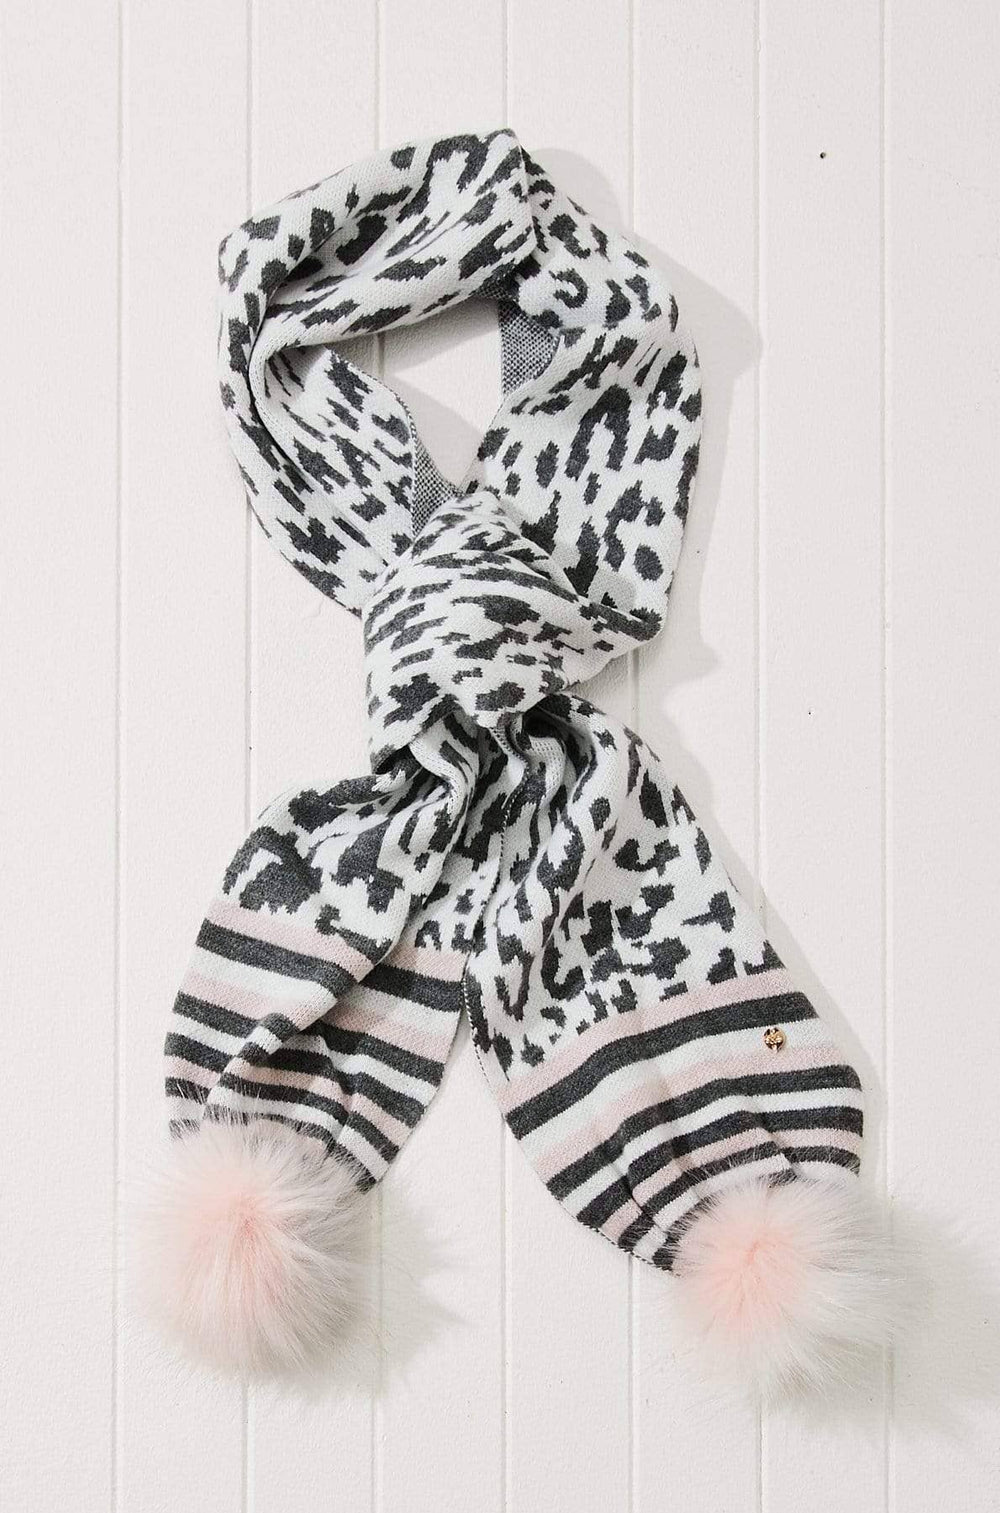 Grey, Pink, and White, Leopard Print Beanie with Fur Pom Poms